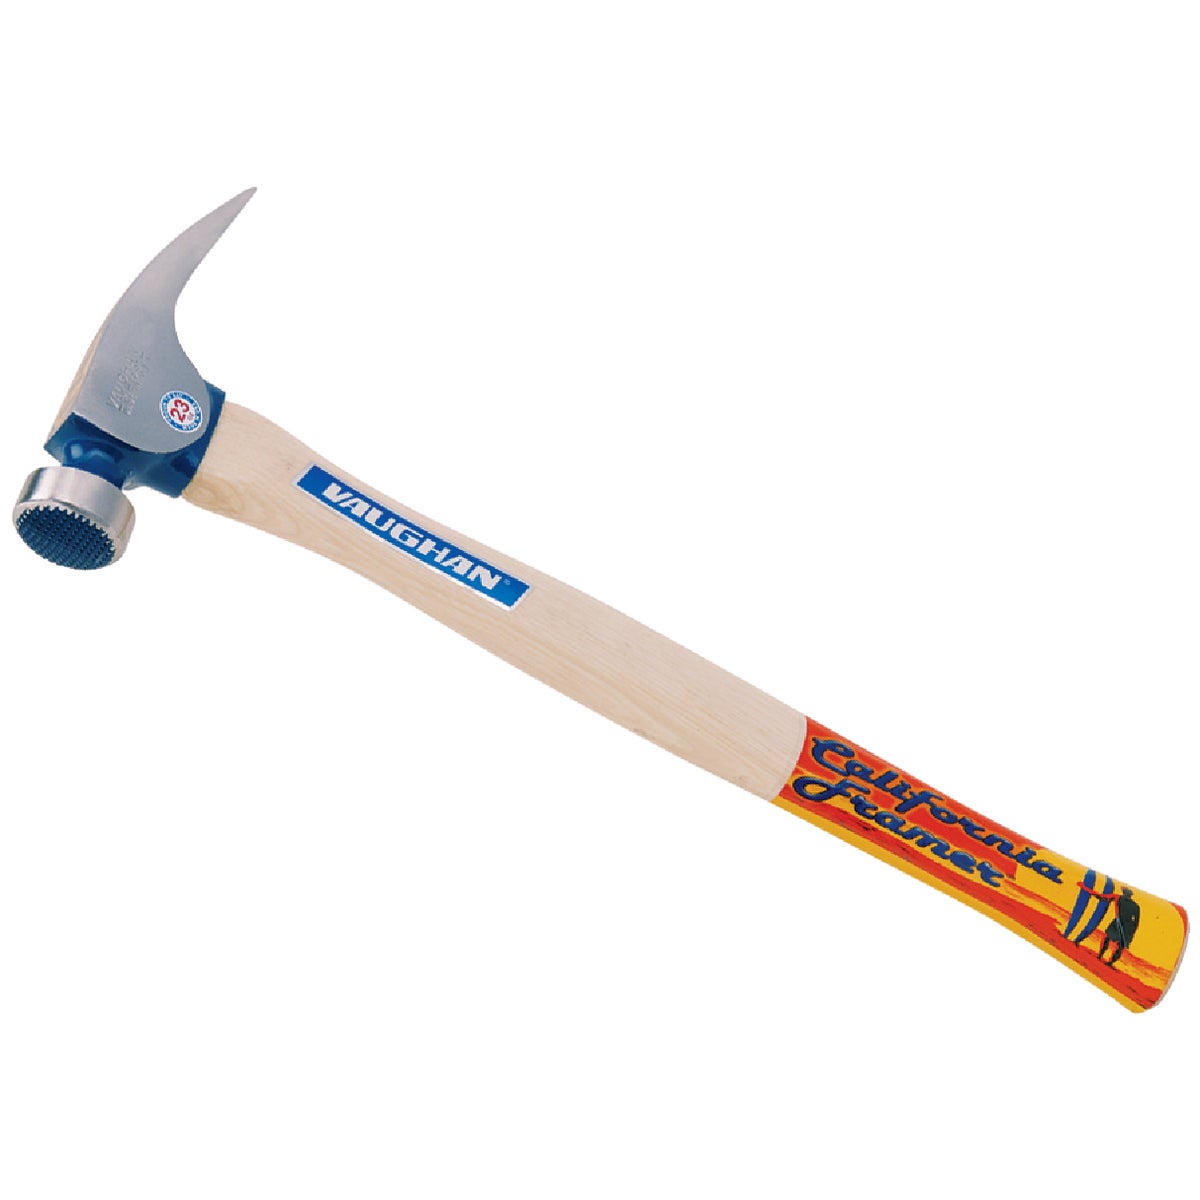 Vaughan California 23 Oz. Milled-Face Framing Hammer with Hickory Handle